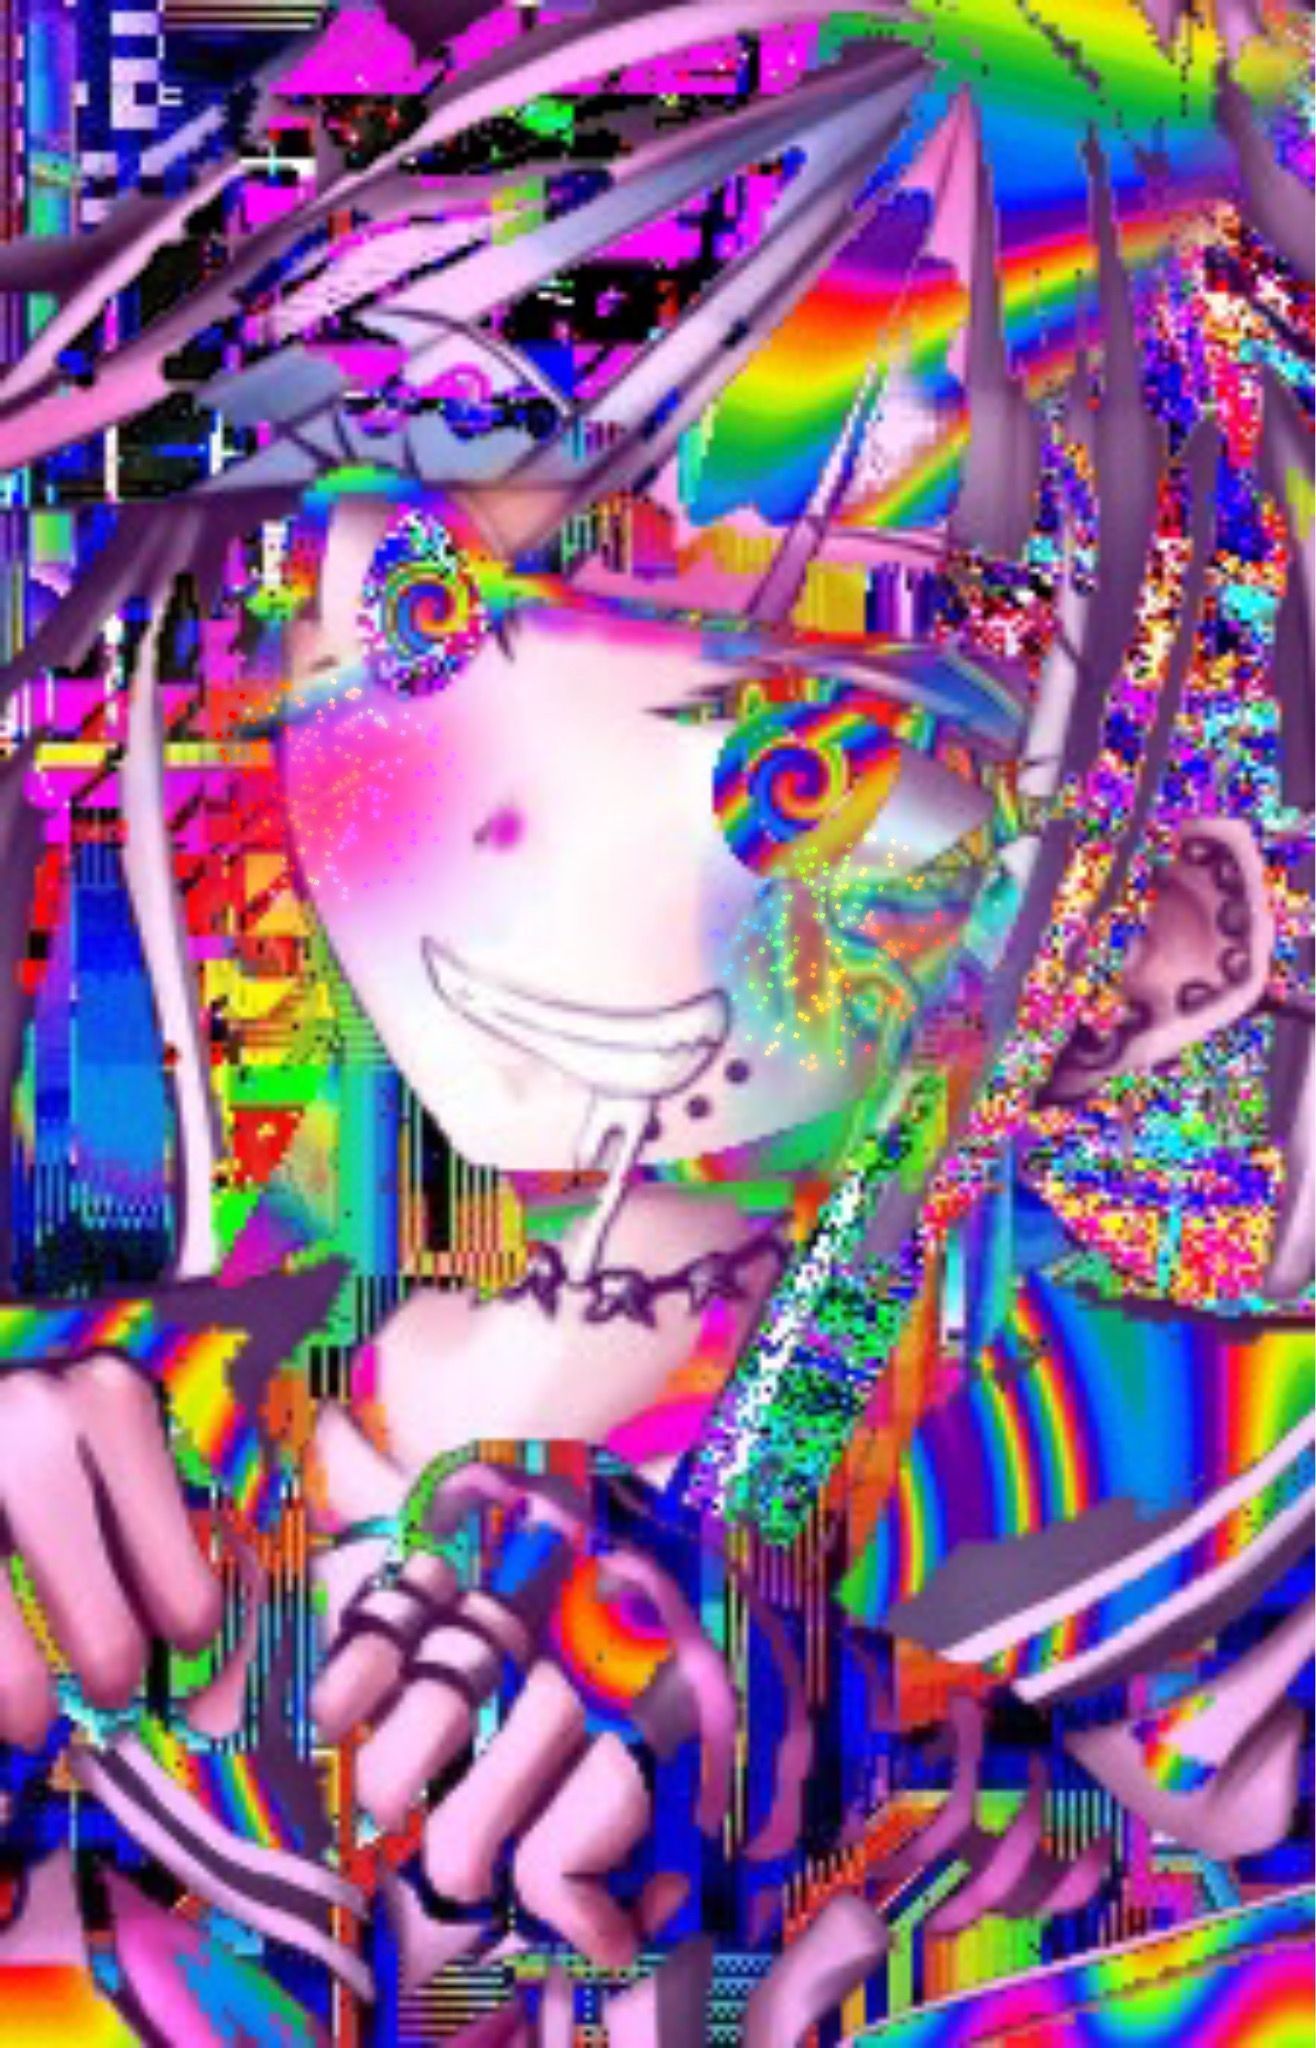 A colorful anime character with rainbow hair - Glitchcore